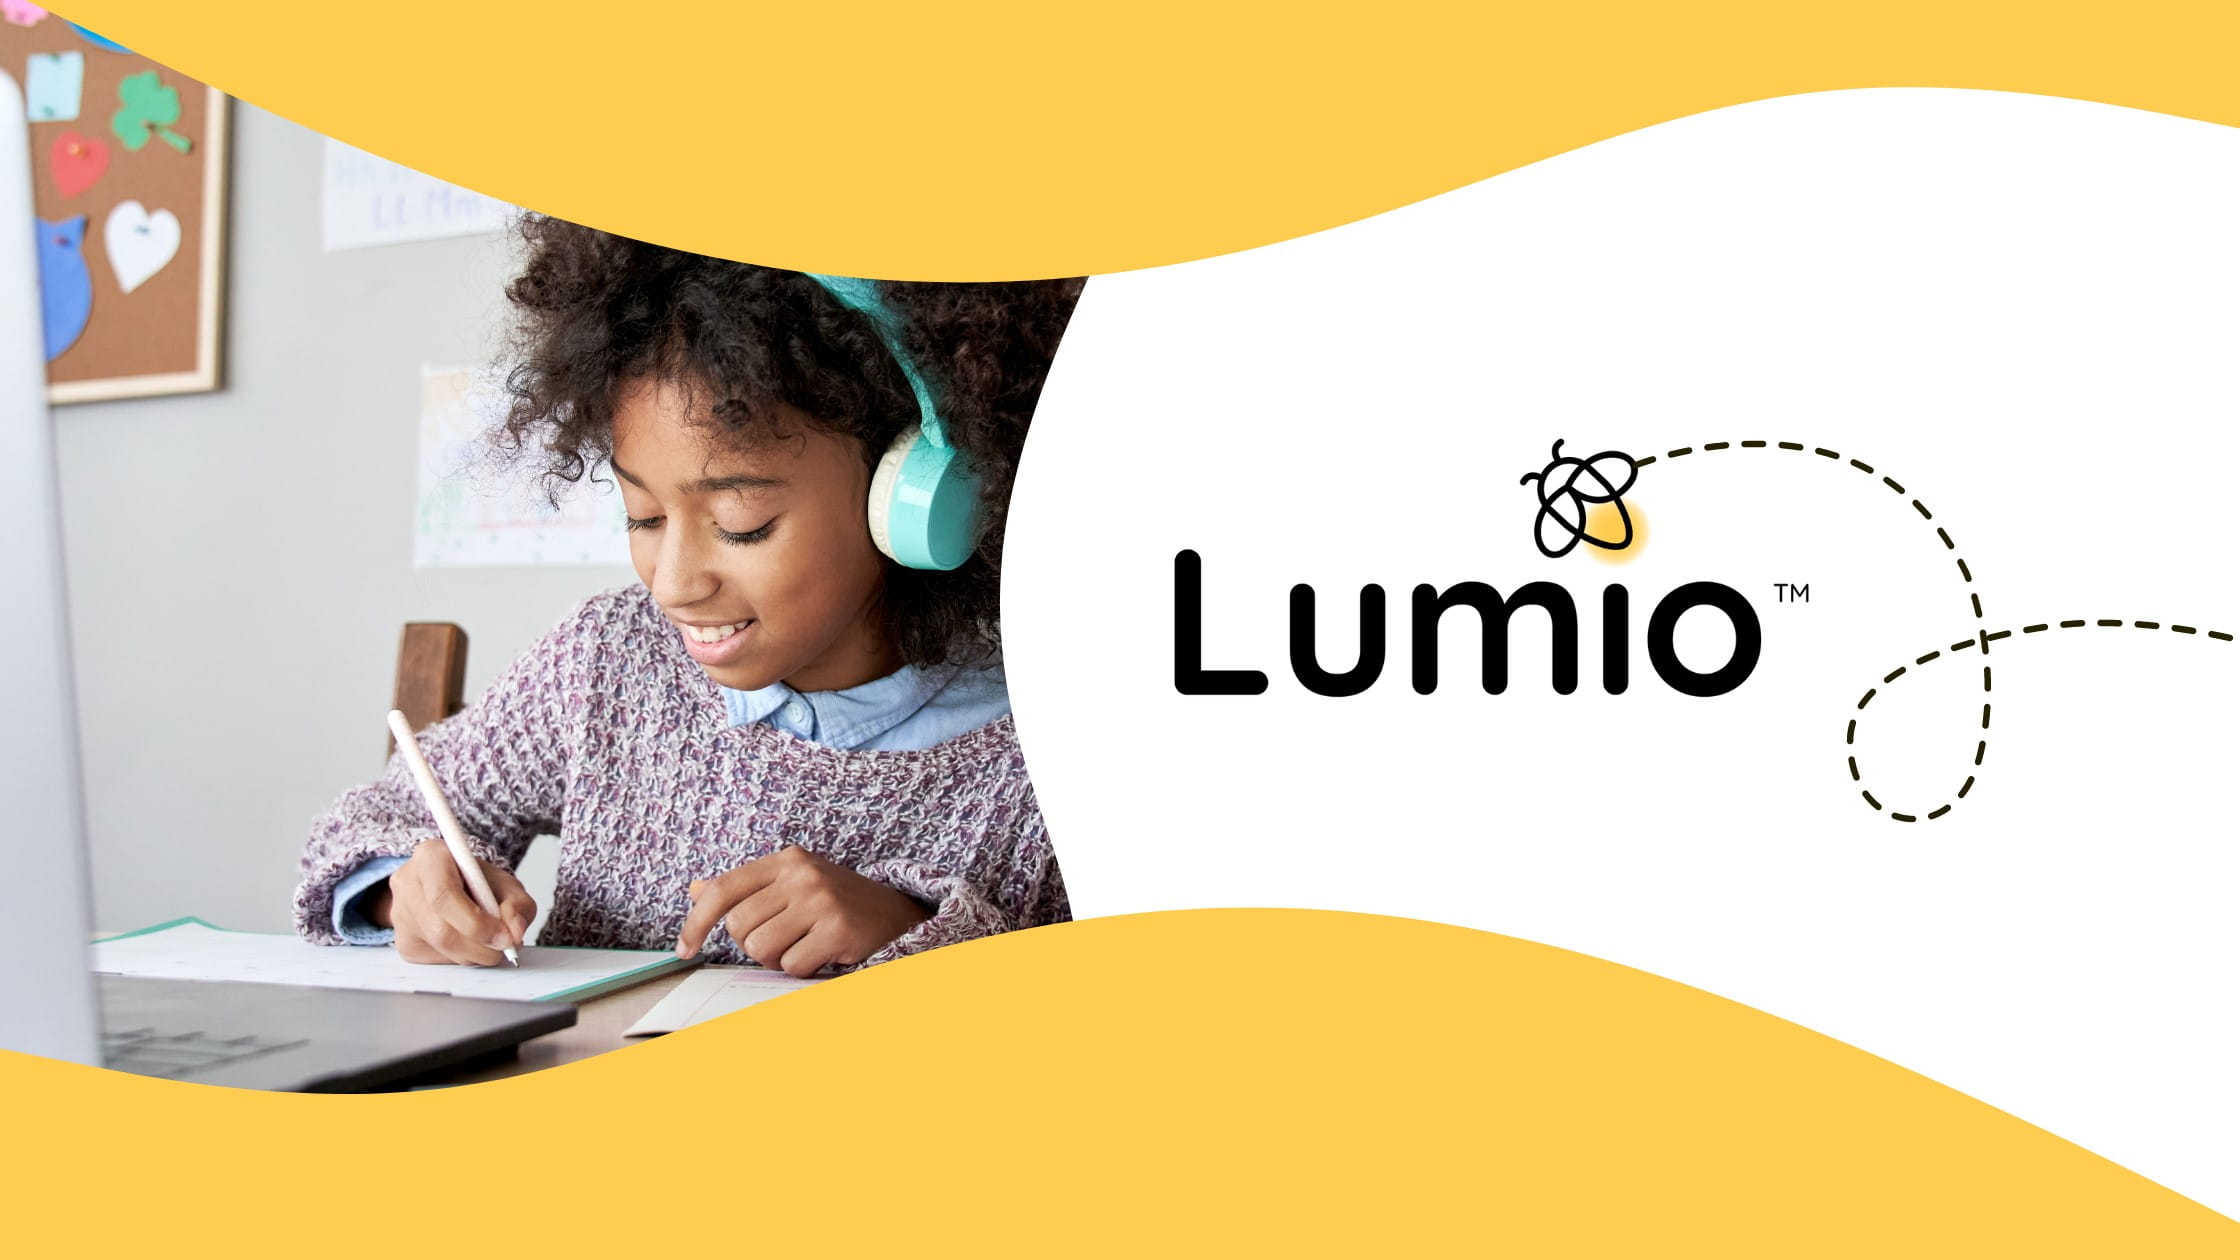 A child sitting in front of a laptop, writing on a piece of paper. The image depicts the combination of asynchronous learning with Lumio to create more engaging and interactive lessons.